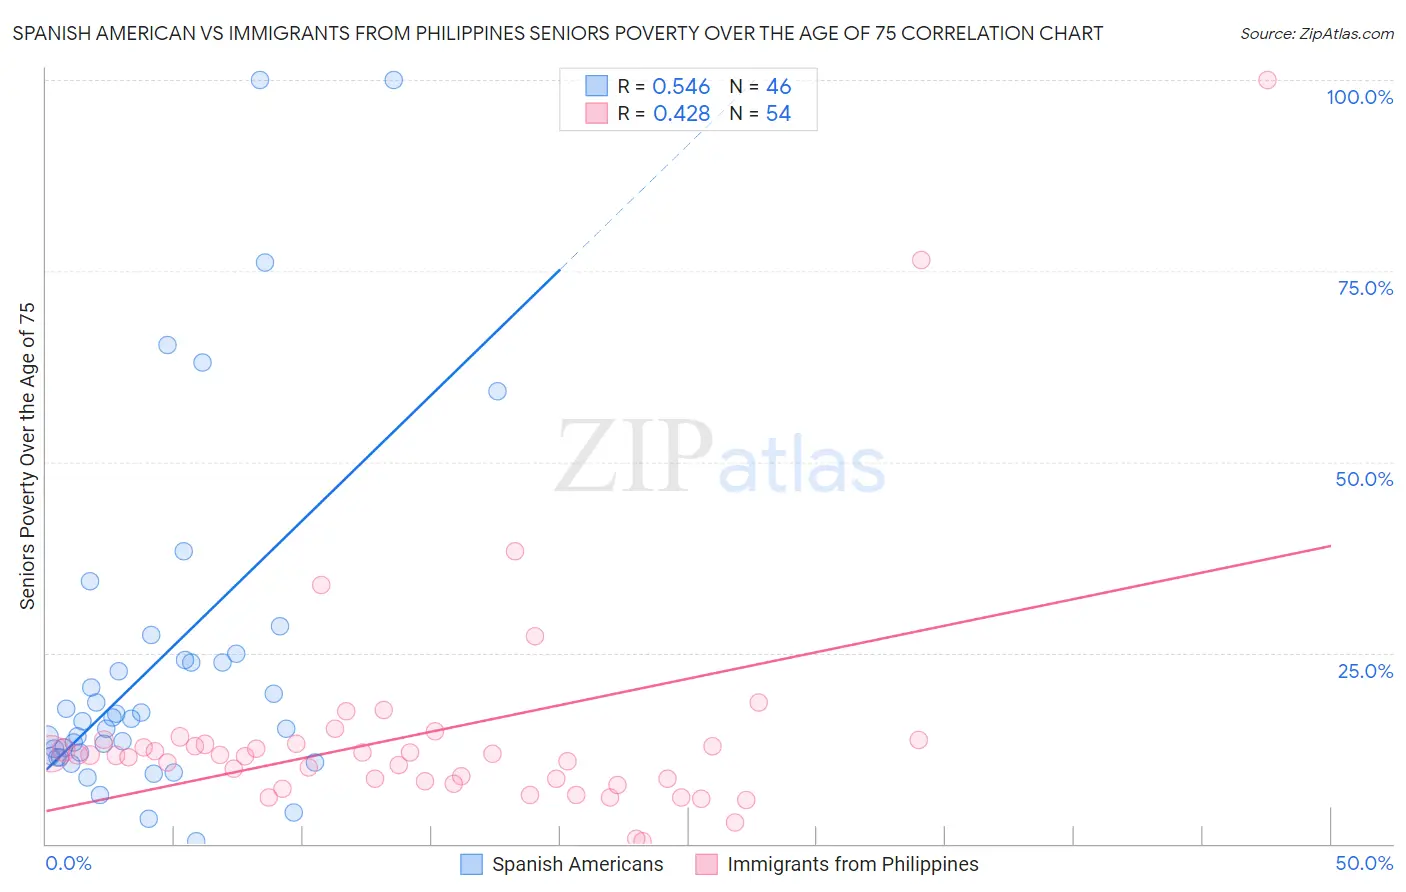 Spanish American vs Immigrants from Philippines Seniors Poverty Over the Age of 75